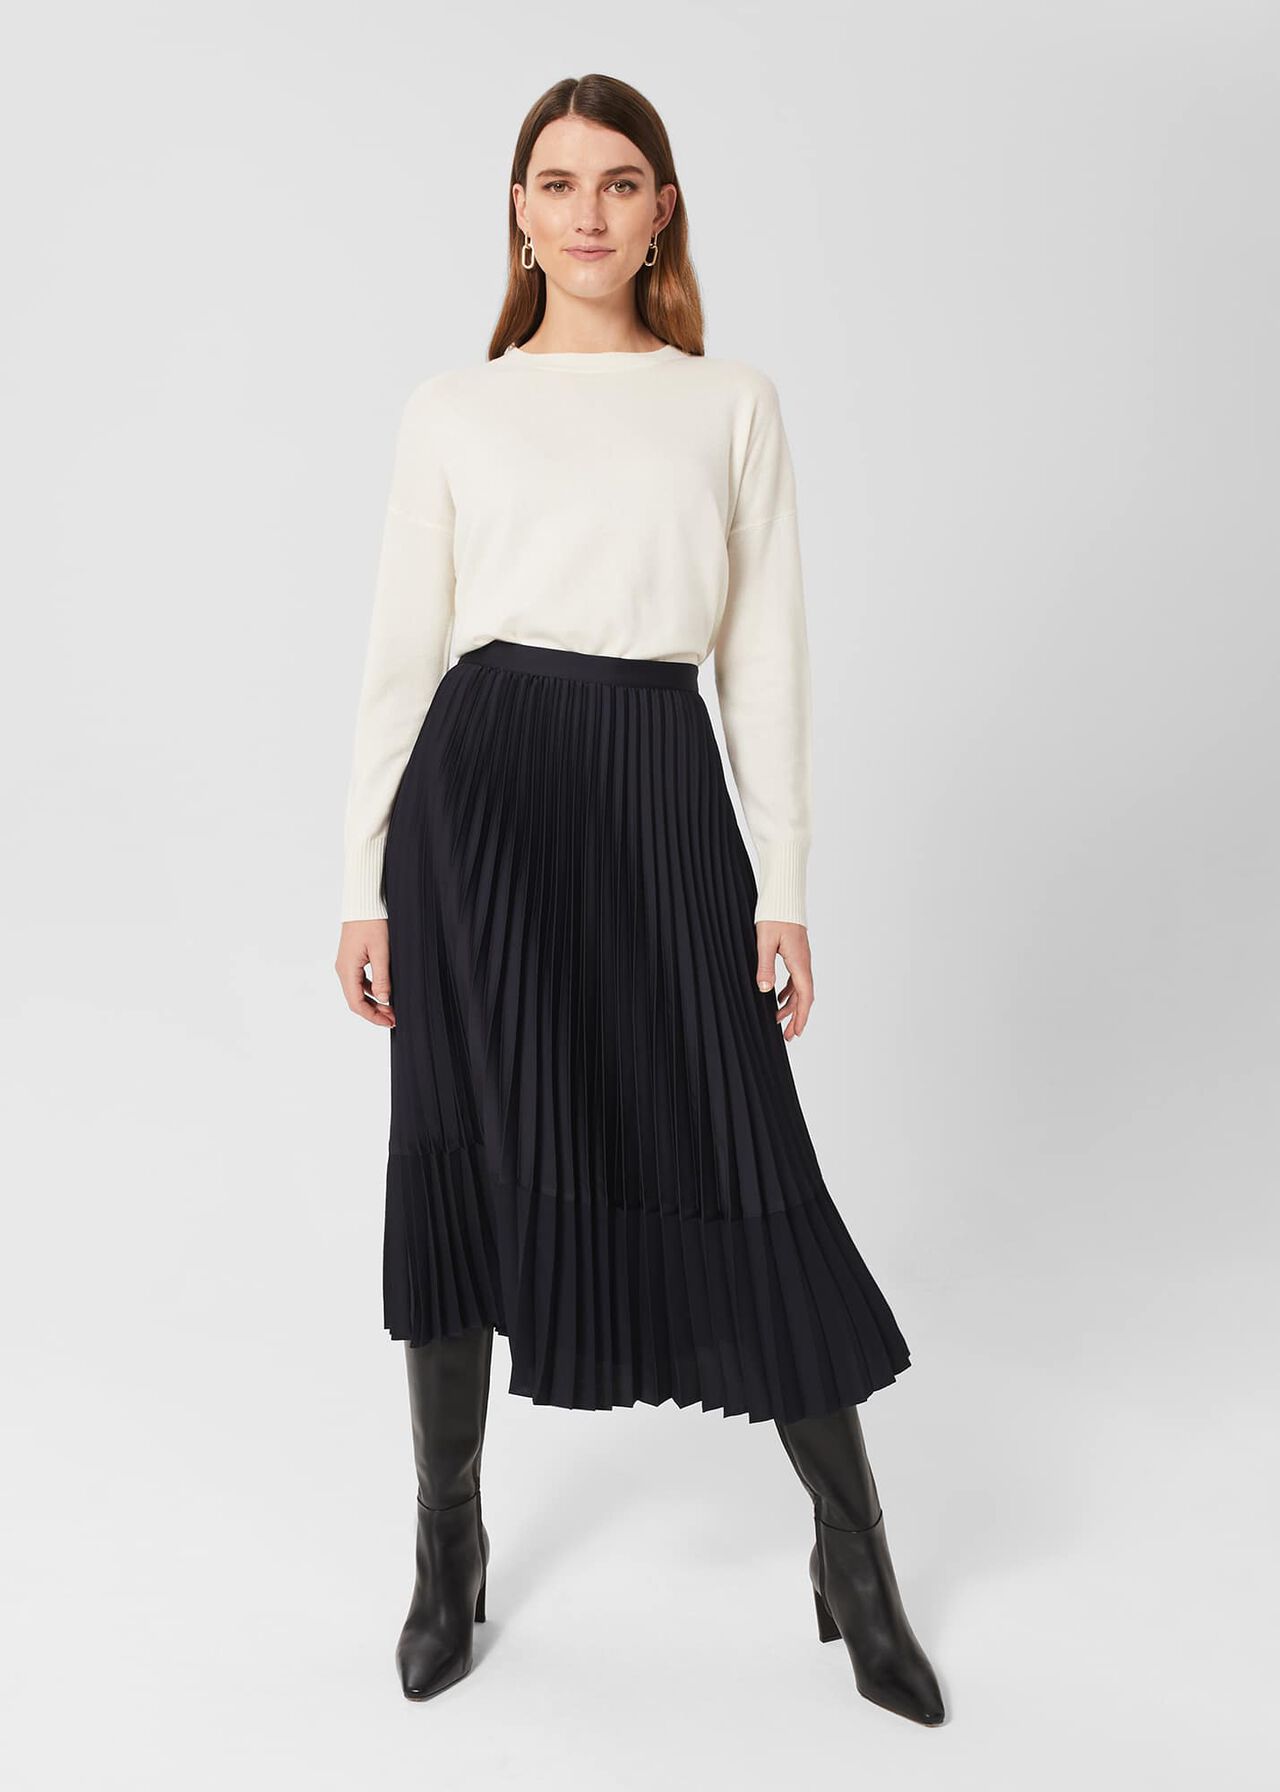 Lydia Button Jumper With Cashmere, Ivory, hi-res